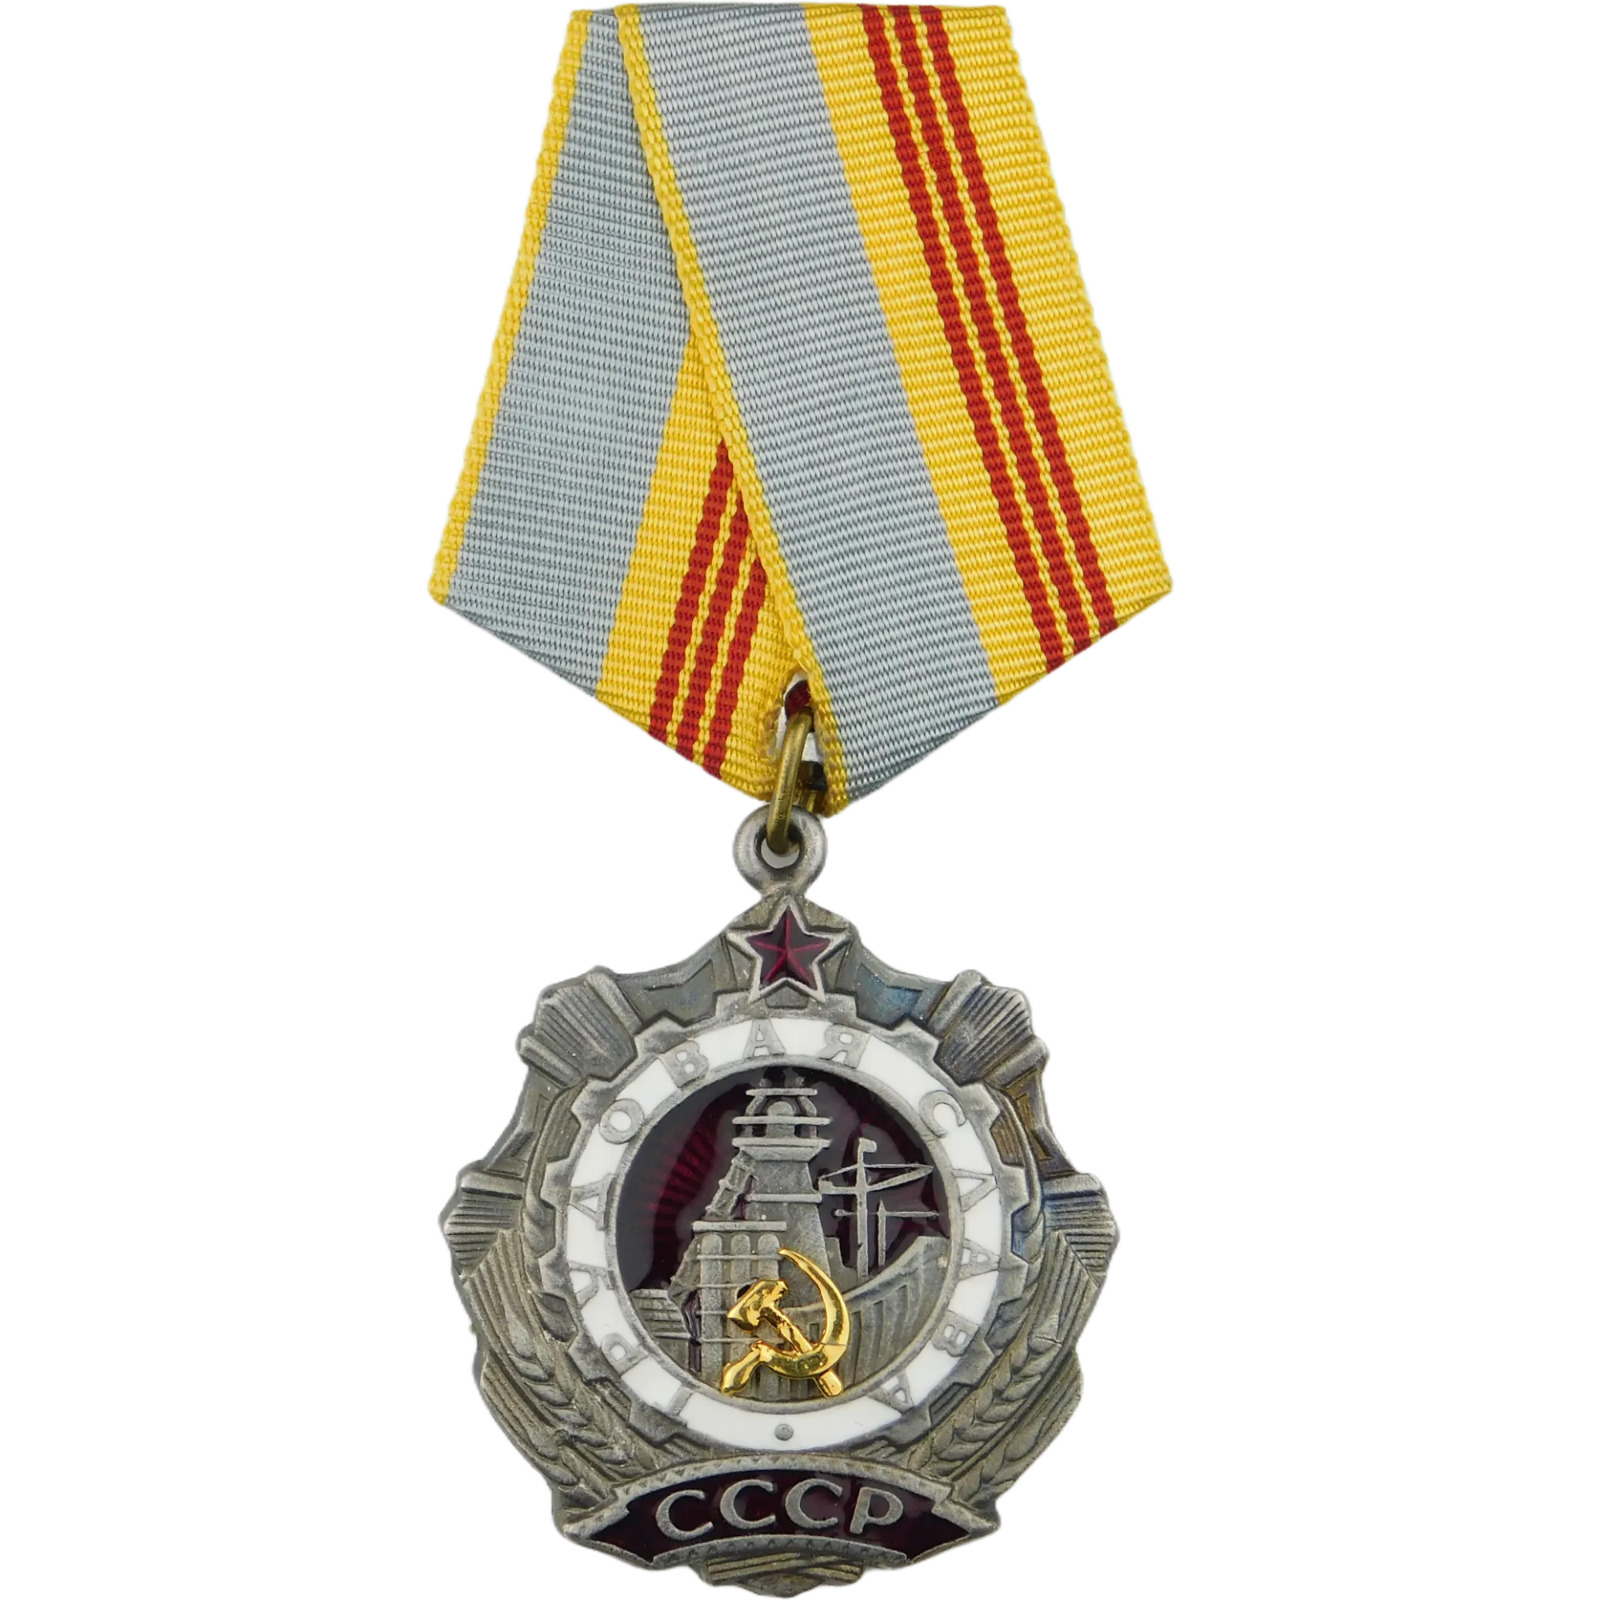 3107 WW2 SOVIET MEDAL ORDER OF LABOUR GLORY 3RD CLASS RUSSIAN RUSSIA USSR